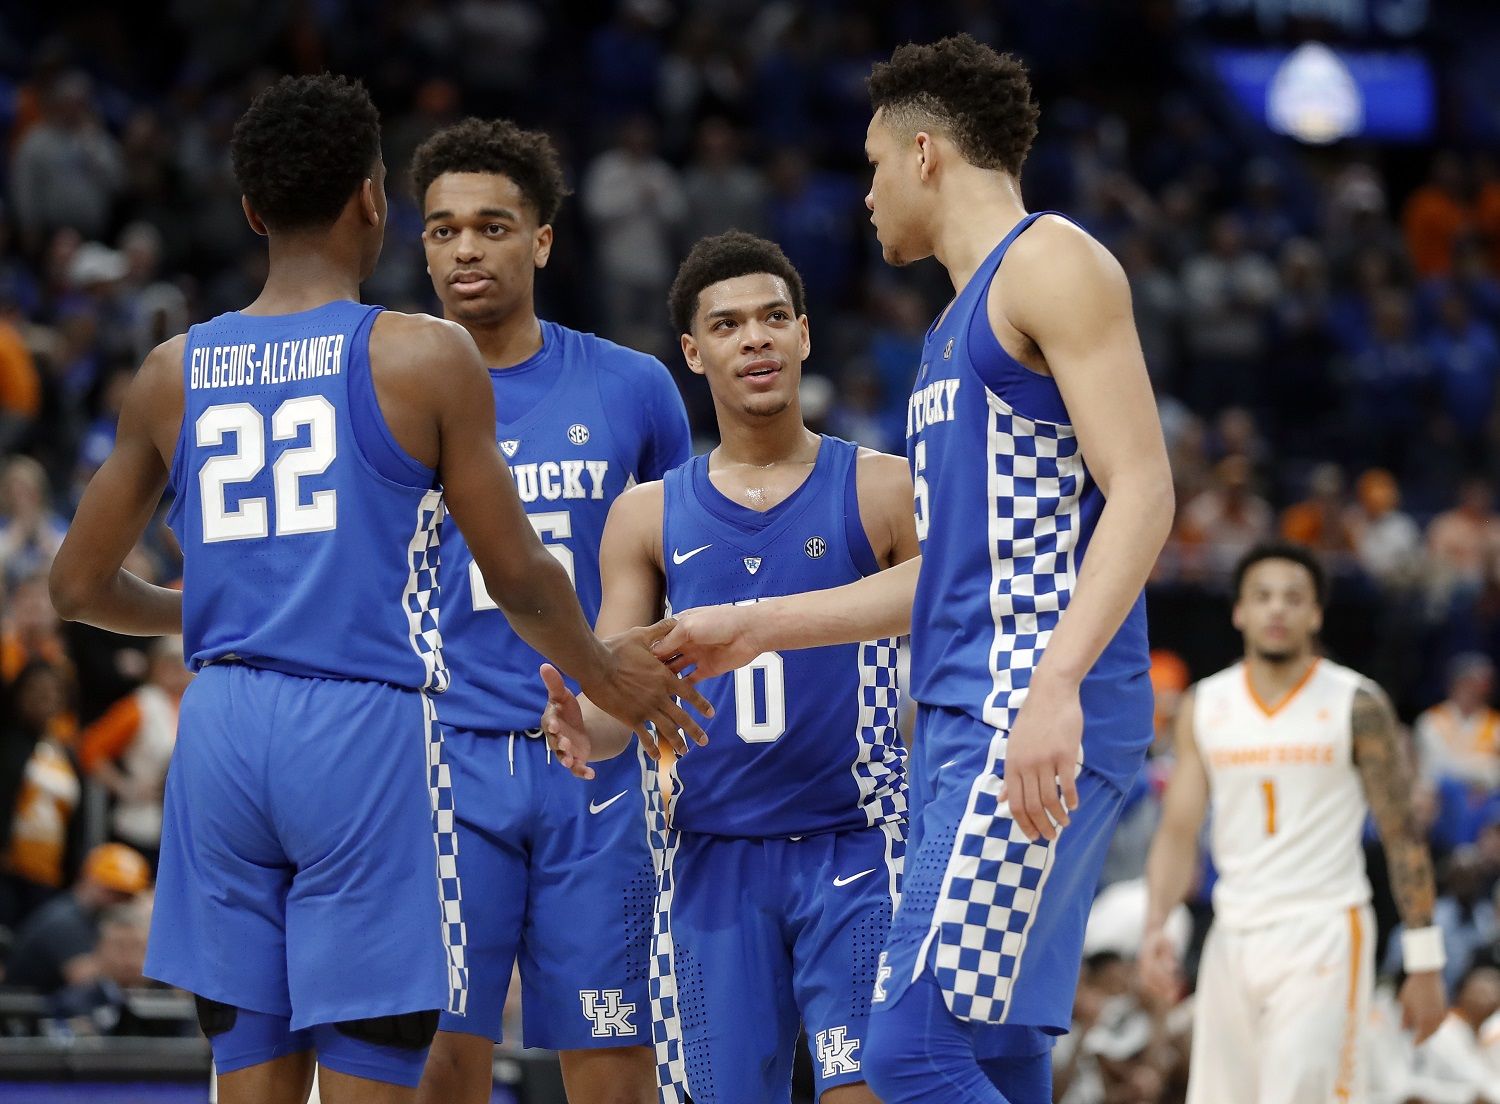 Kentucky's Shai Gilgeous-Alexander (22), PJ Washington (25), Quade Green (0) and Kevin Knox (5) celebrate in the final seconds of their win over Tennessee in an NCAA college basketball championship game at the Southeastern Conference tournament Sunday, March 11, 2018, in St. Louis. (AP Photo/Jeff Roberson)